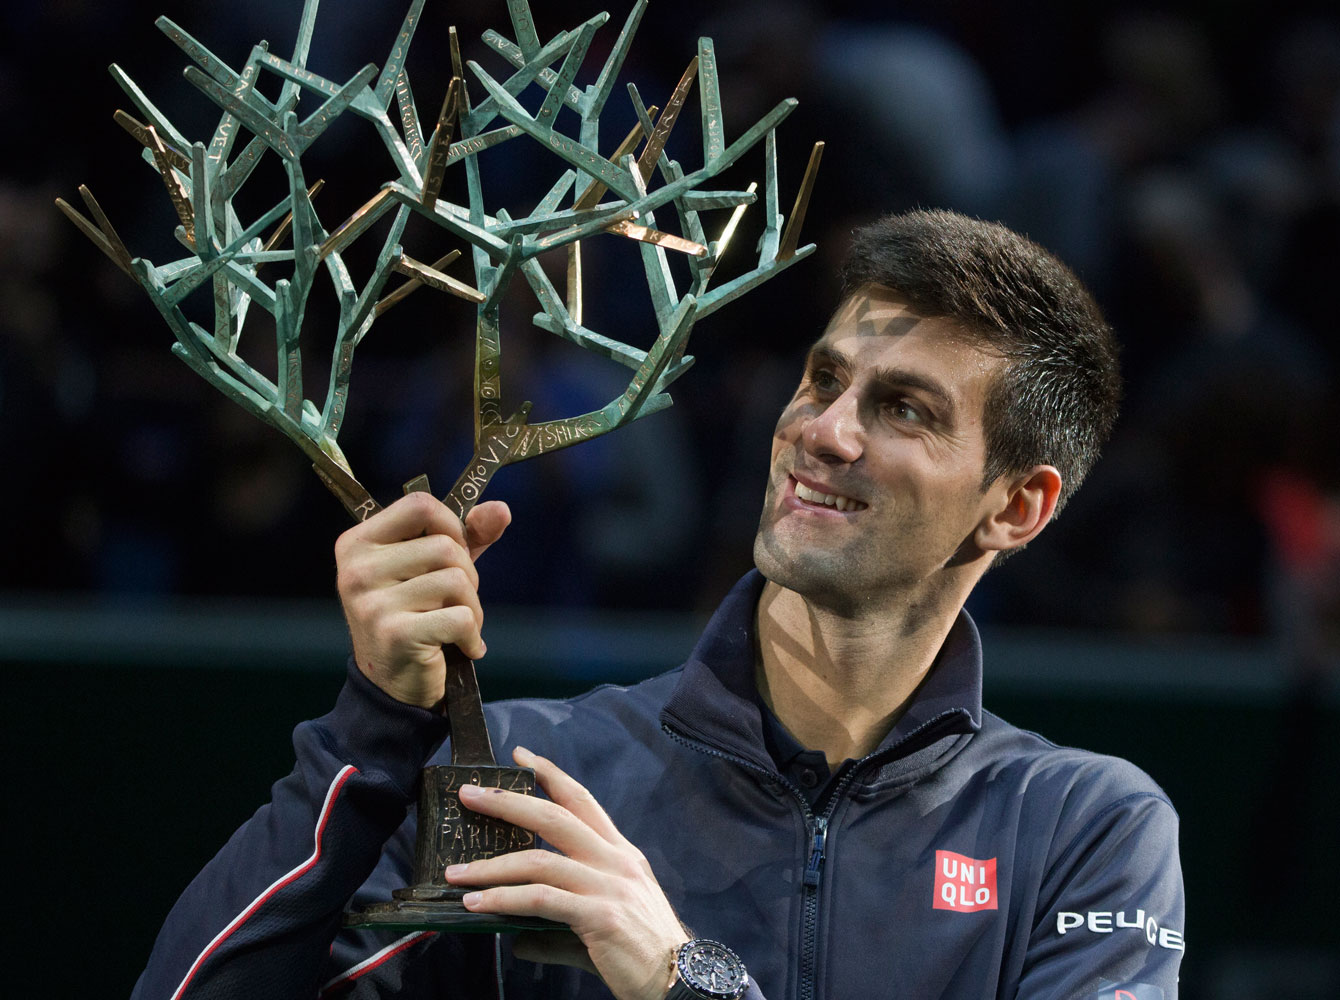 "I can be a majestic deer next Halloween" - Novak Djokovic might've said while lifting his Paris Masters trophy, but probably didn't. Djokovic, the world number one player, will be in a group with Stan Wawrinka, Tomas Berdych and Marin Cilic in the ATP Finals round robin. 